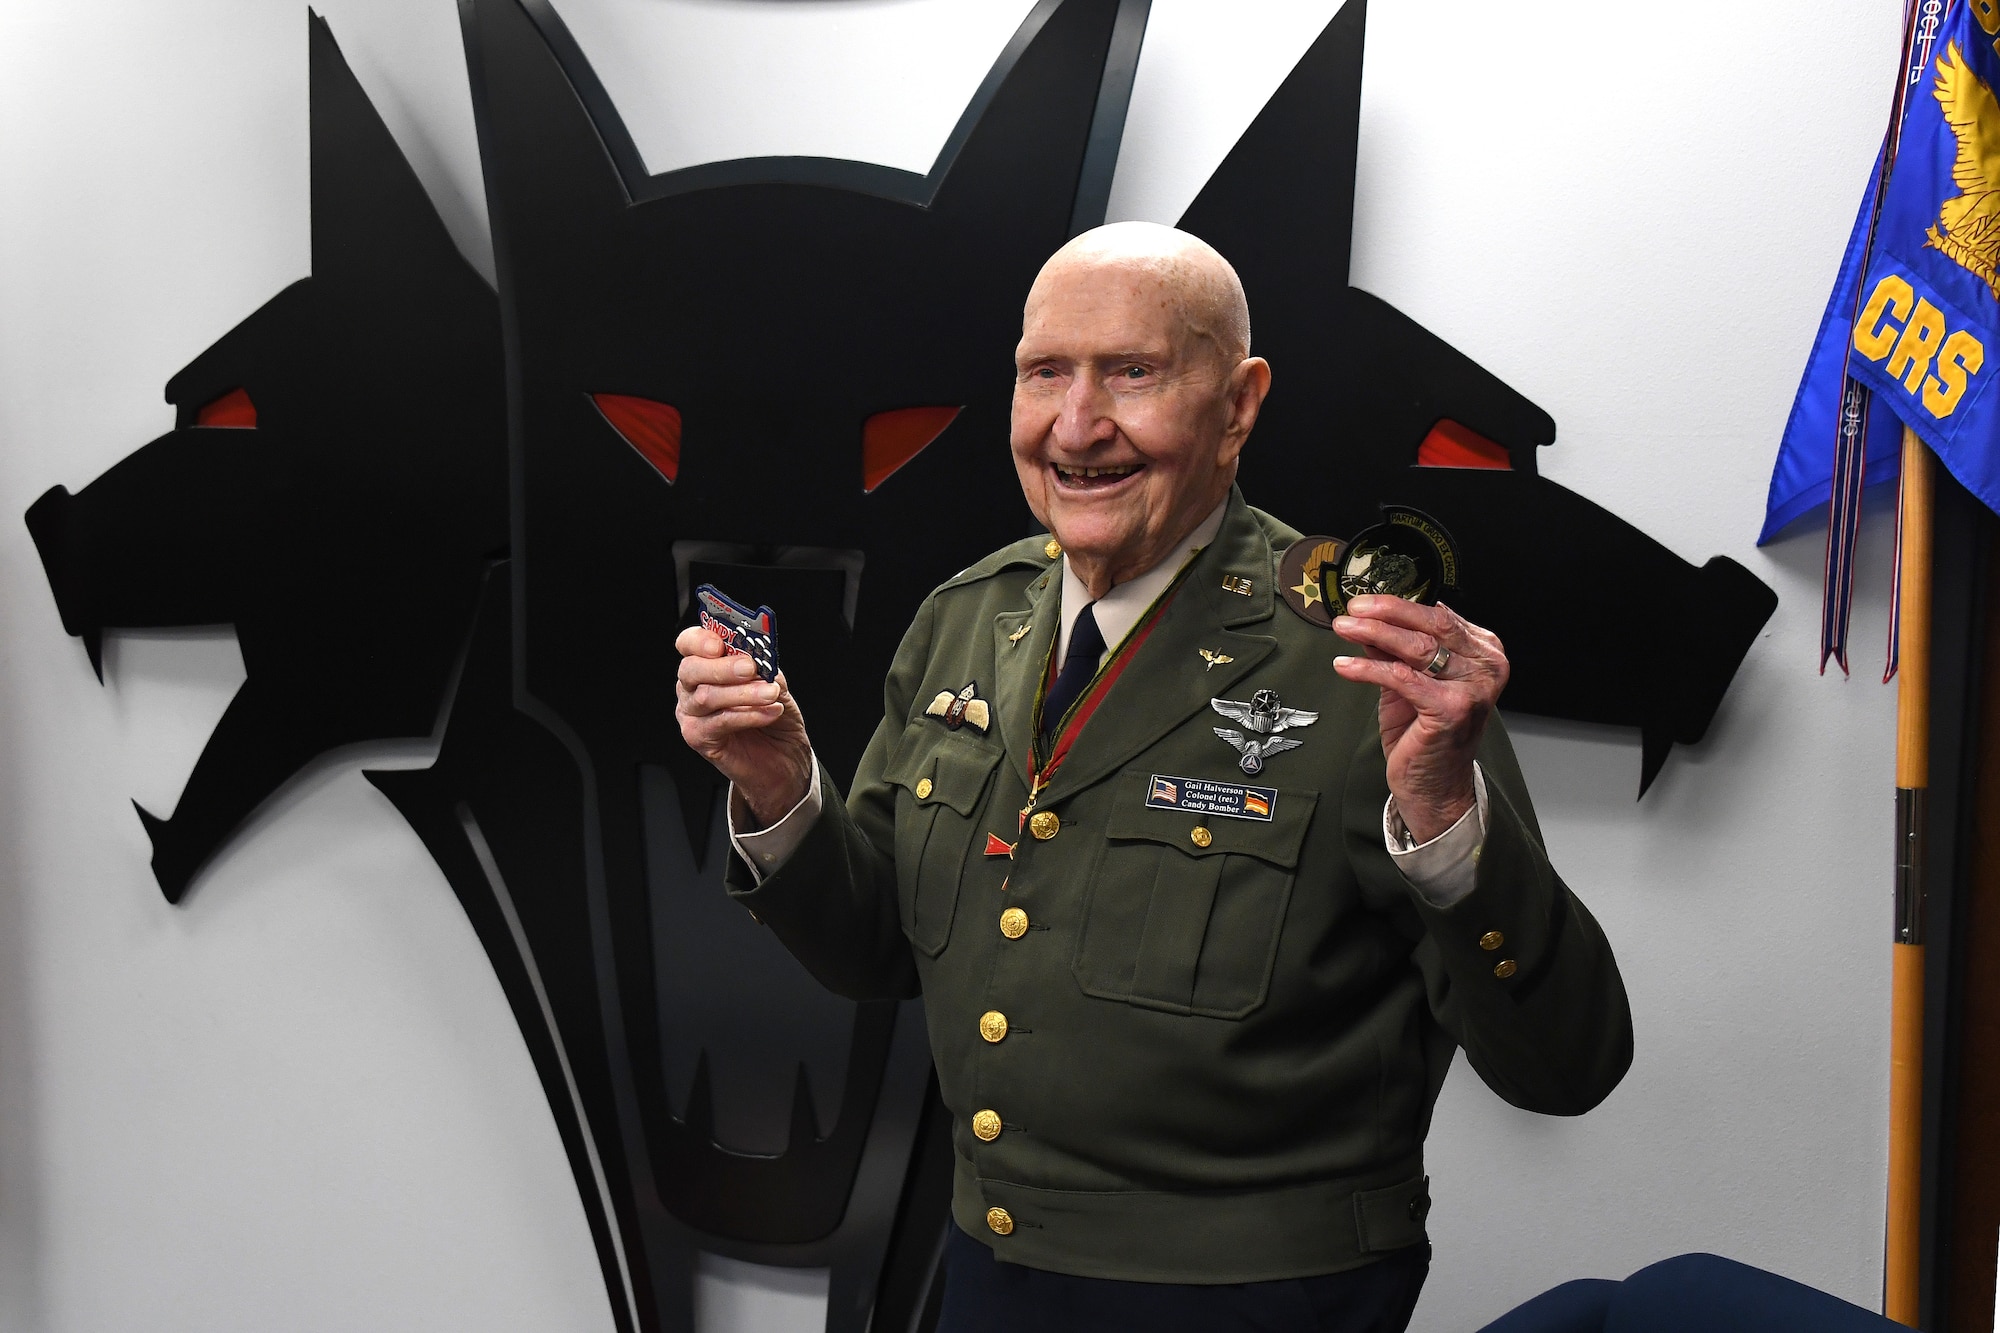 U.S. Air Force retired Col. Gail S. Halvorsen, the Berlin Candy Bomber, smiles as he displays the patches given to him by  Airmen assigned to the 821st Contingency Response Squadron during his visit to Travis Air Force Base, California, Jan. 31, 2020. The 99-year old war hero shared his amazing story with the Airmen and as a tribute to his legacy, he was inducted into the squadron's "Super Howl" hall of fame. The Super-Howl was initiated by the squadron as a way to recognize military veterans who visit their unit and have played an important role in the nation’s history. The squadron displays this honor on a plaque at the unit where they add the name of the inductee next to the operation he or she served in. (U.S. Air Force photo/ TSgt Liliana Moreno)